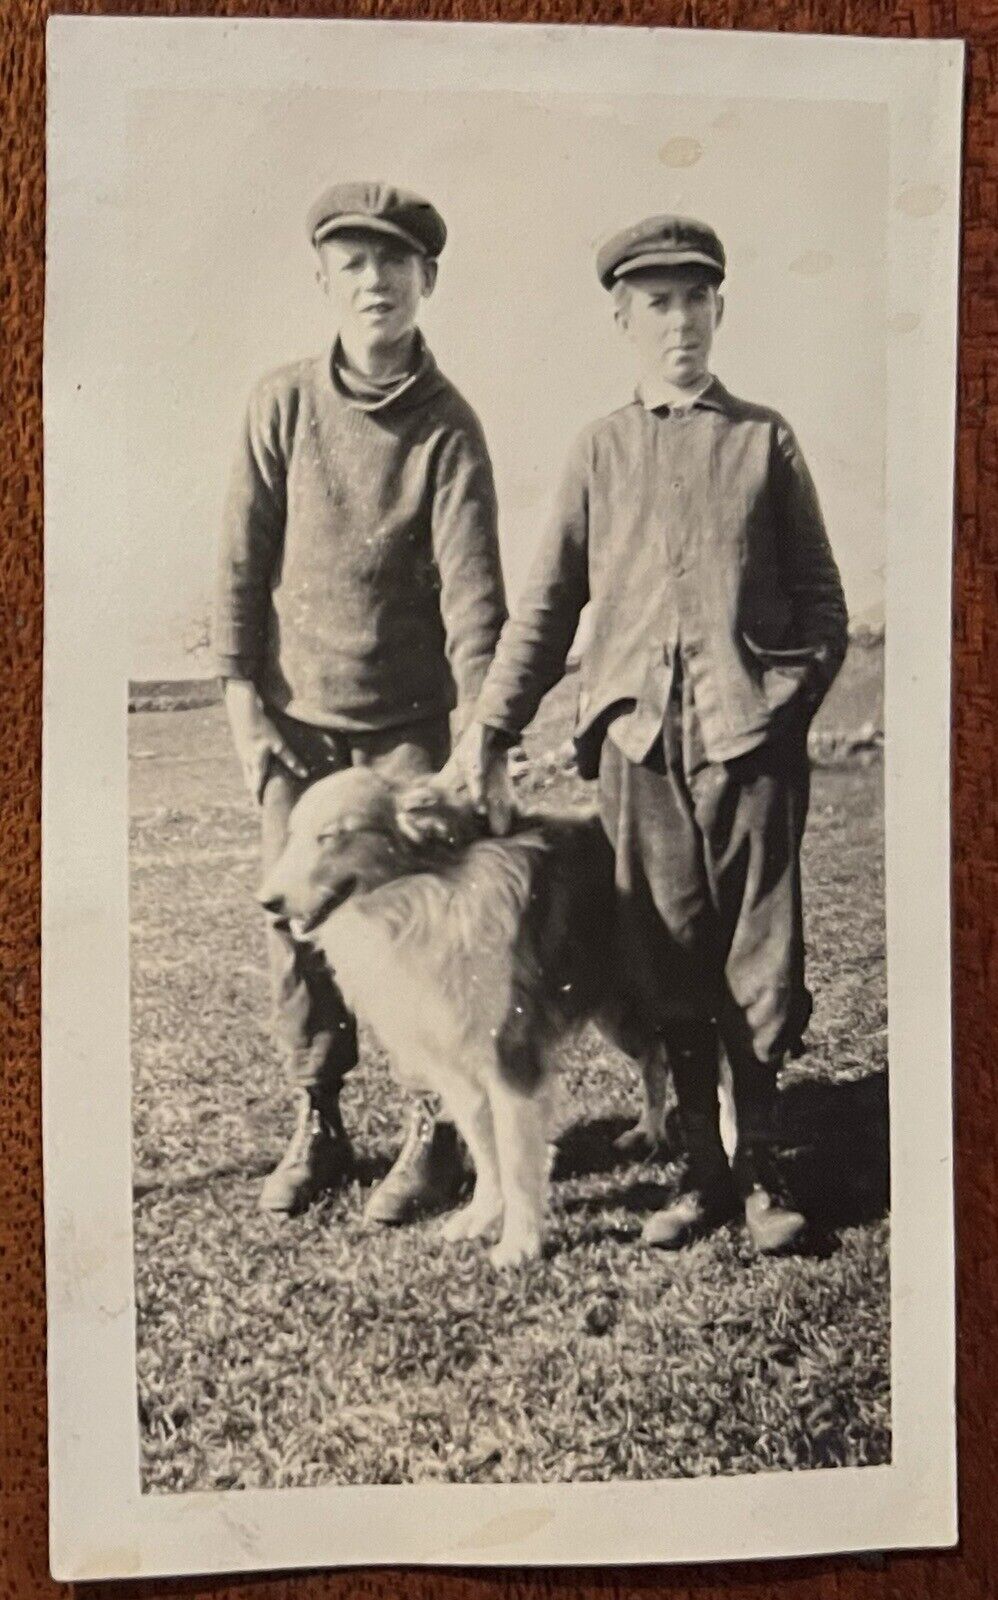 ATQ 1910s Photo Collie Two Boys Brothers Knickers Newsboy Hats Caps Rural